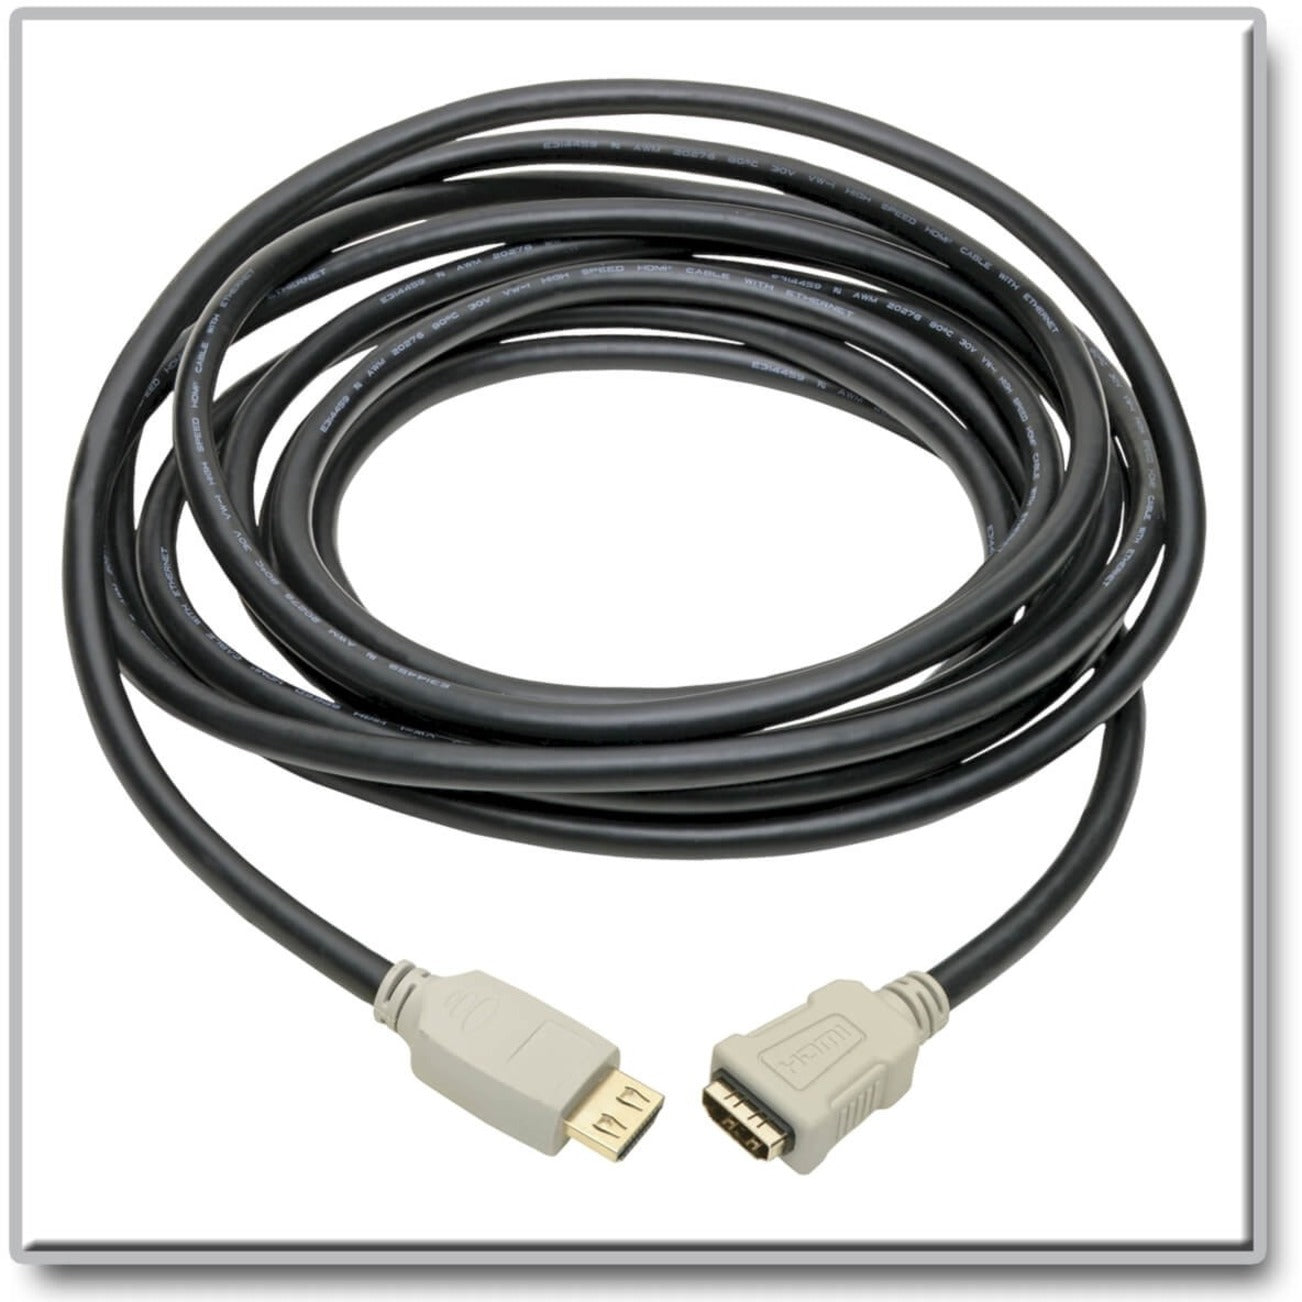 Tripp Lite P569-015-2B-MF HDMI Audio/Video Cable, 15ft High-Speed, Gripping Connector